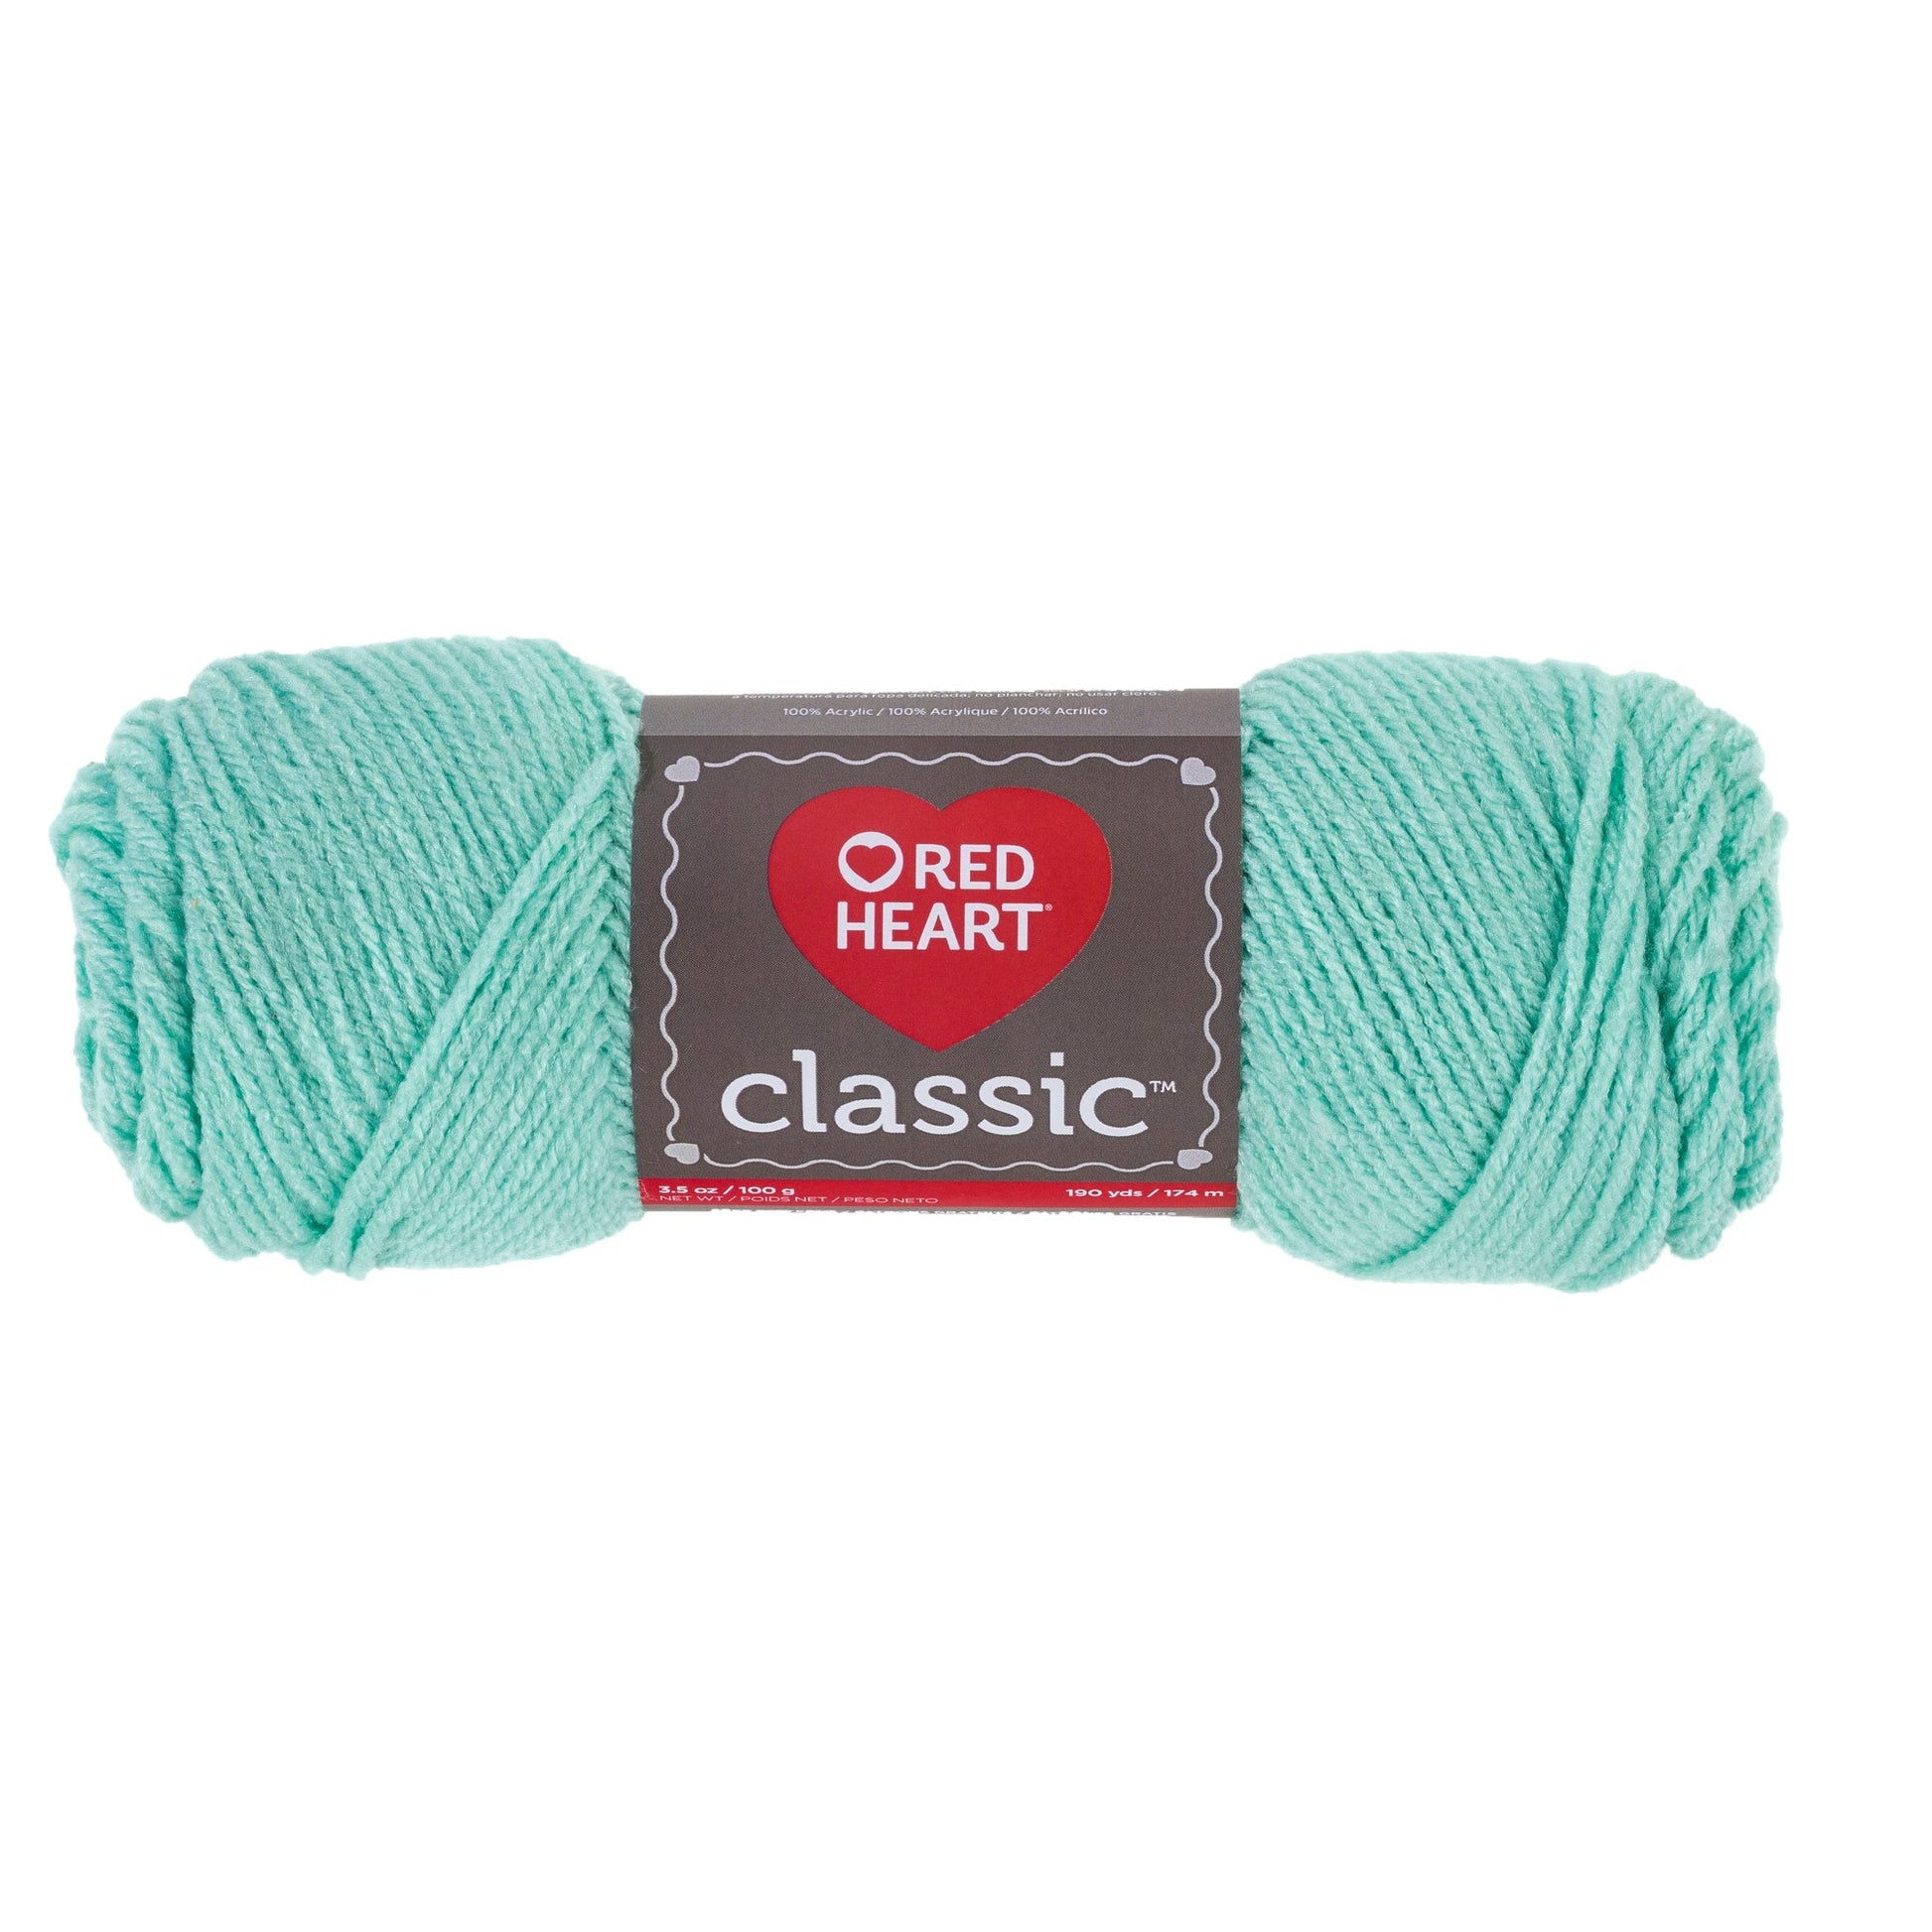 Red Heart Classic Yarn - Clearance shades Mist Green